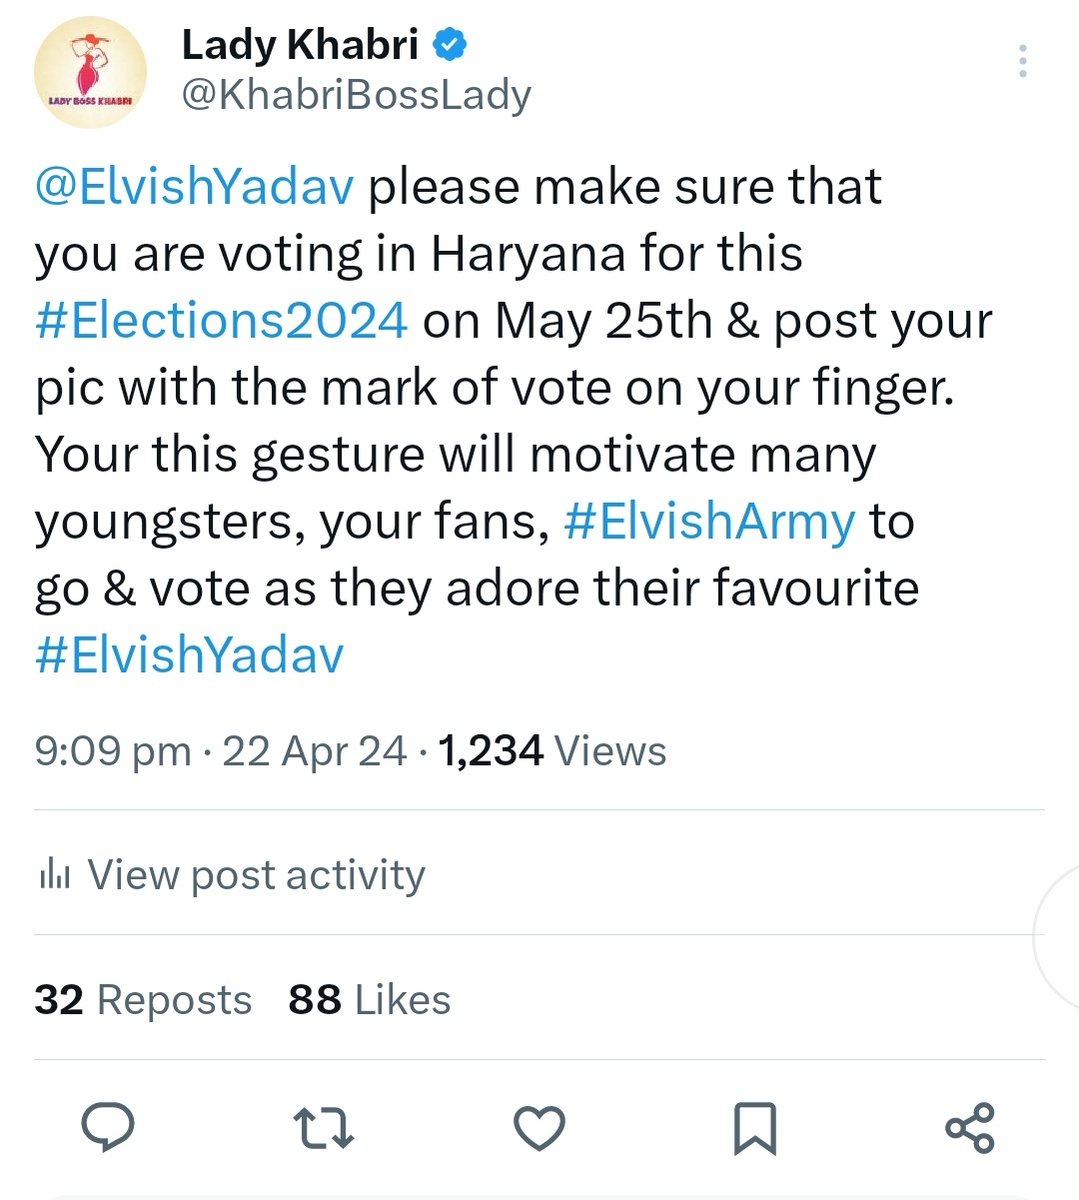 #ElvishYadav voted & even posted the pic. On 22nd April 2024, I posted a tweet tagging & requesting @ElvishYadav to vote & post the image. He just did the same, he voted with his family. Am not saying that he read my tweet, but he did what's right, what a real youth influencer